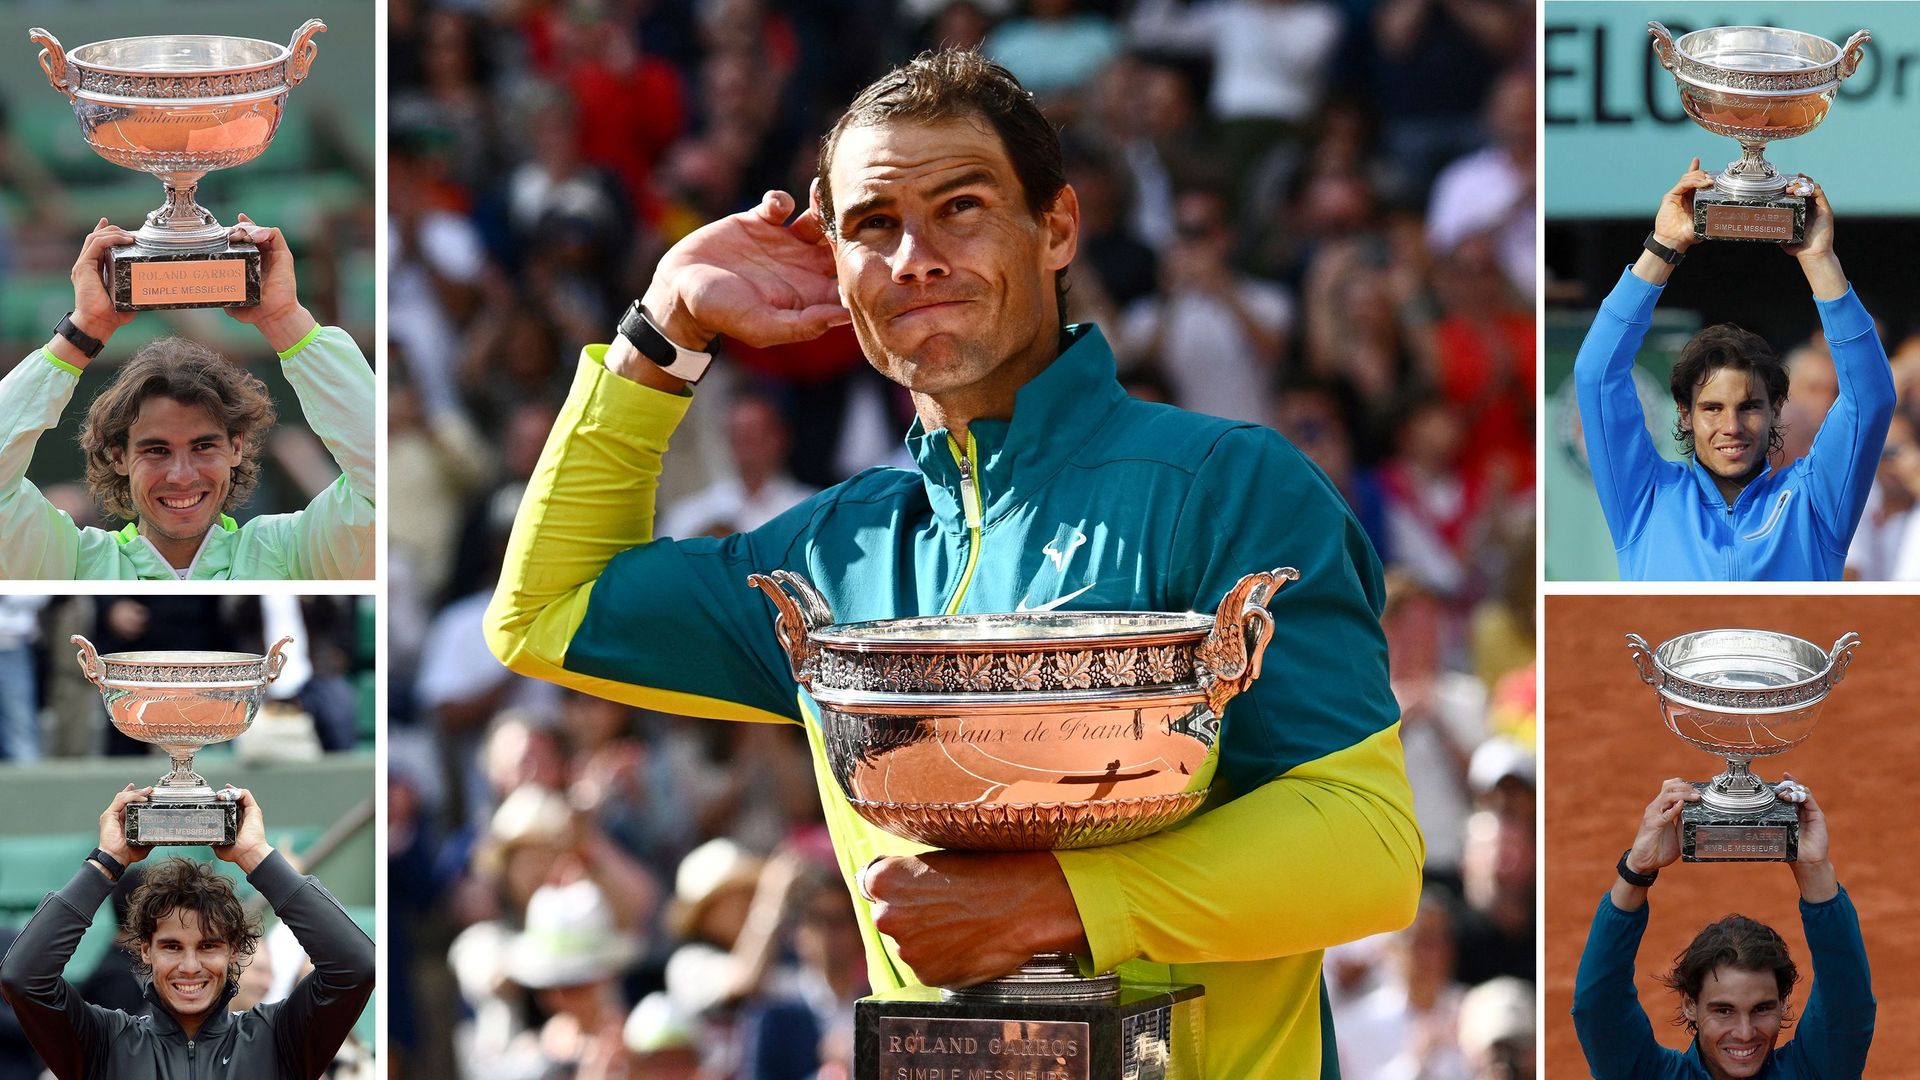 Photos of Raphael Nadal in his French Open wins over the years.